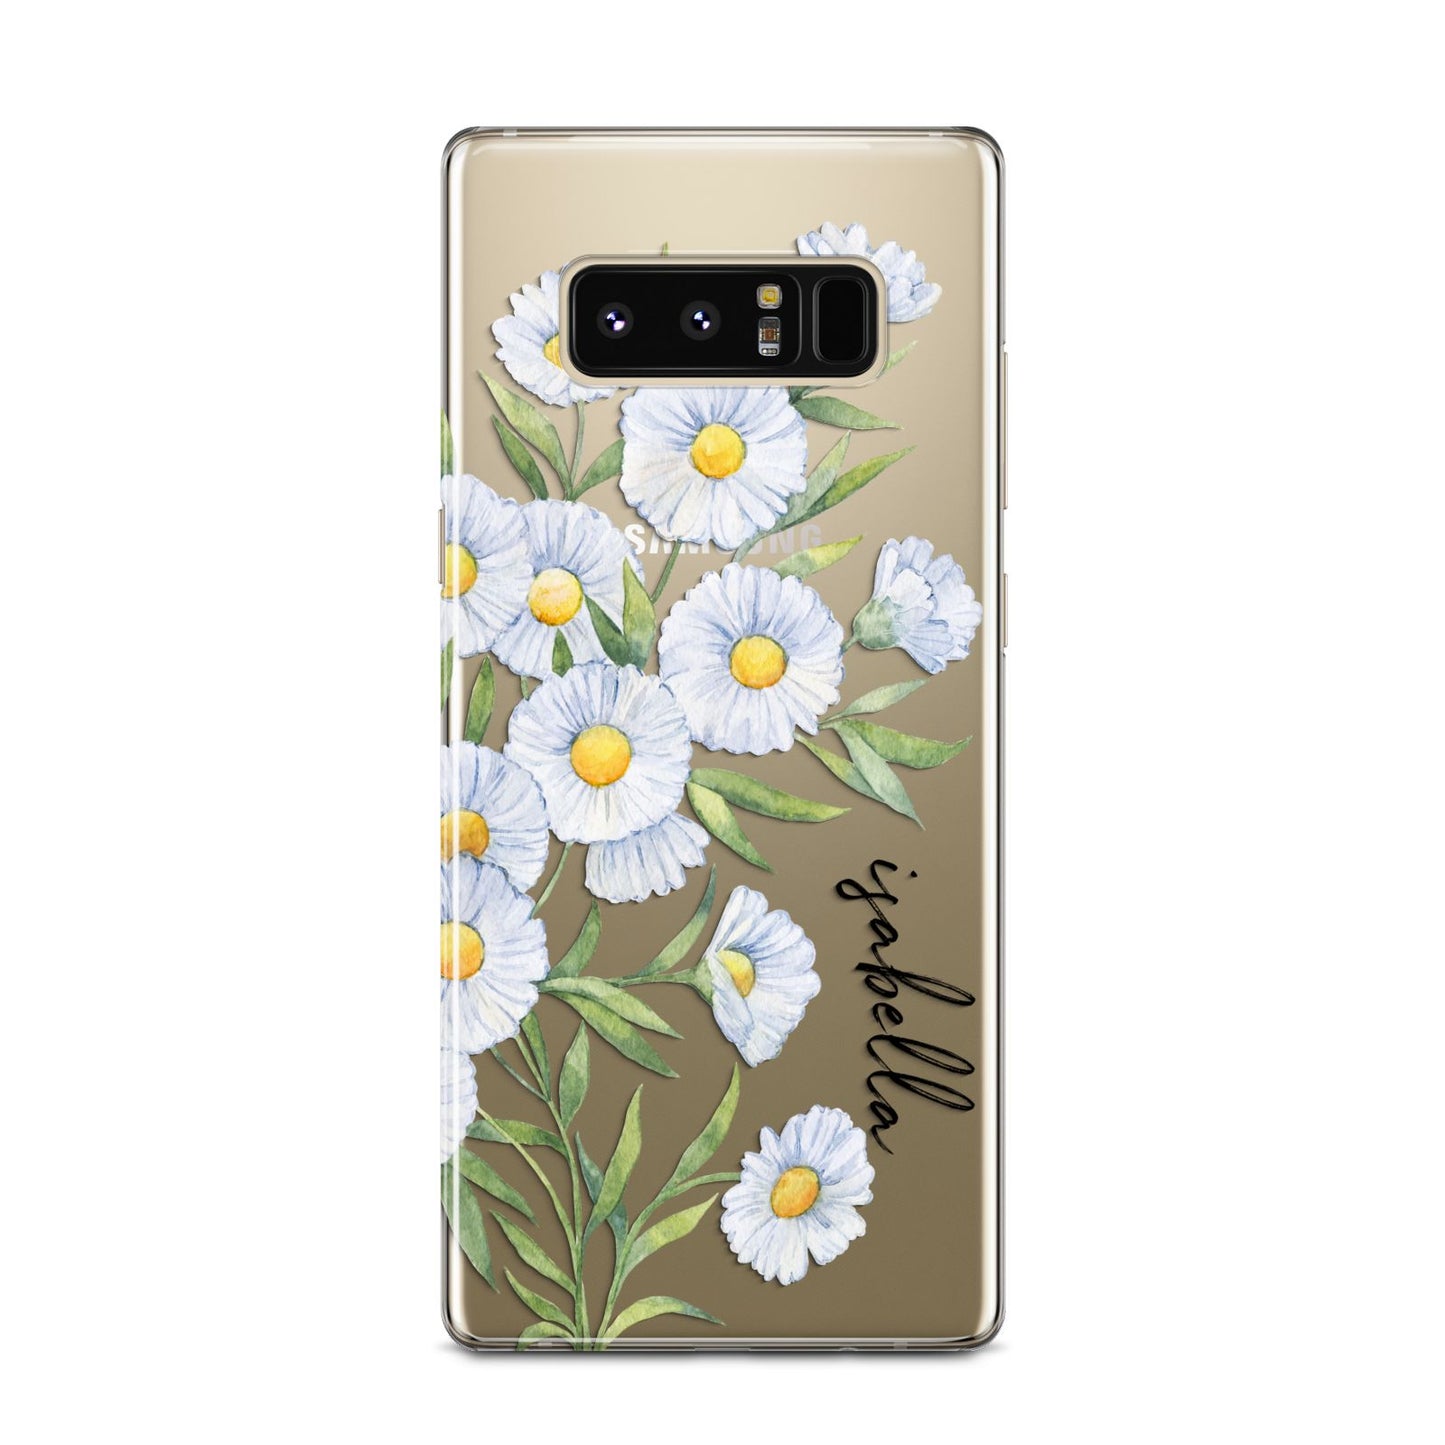 Personalised Daisy Flower Samsung Galaxy Note 8 Case